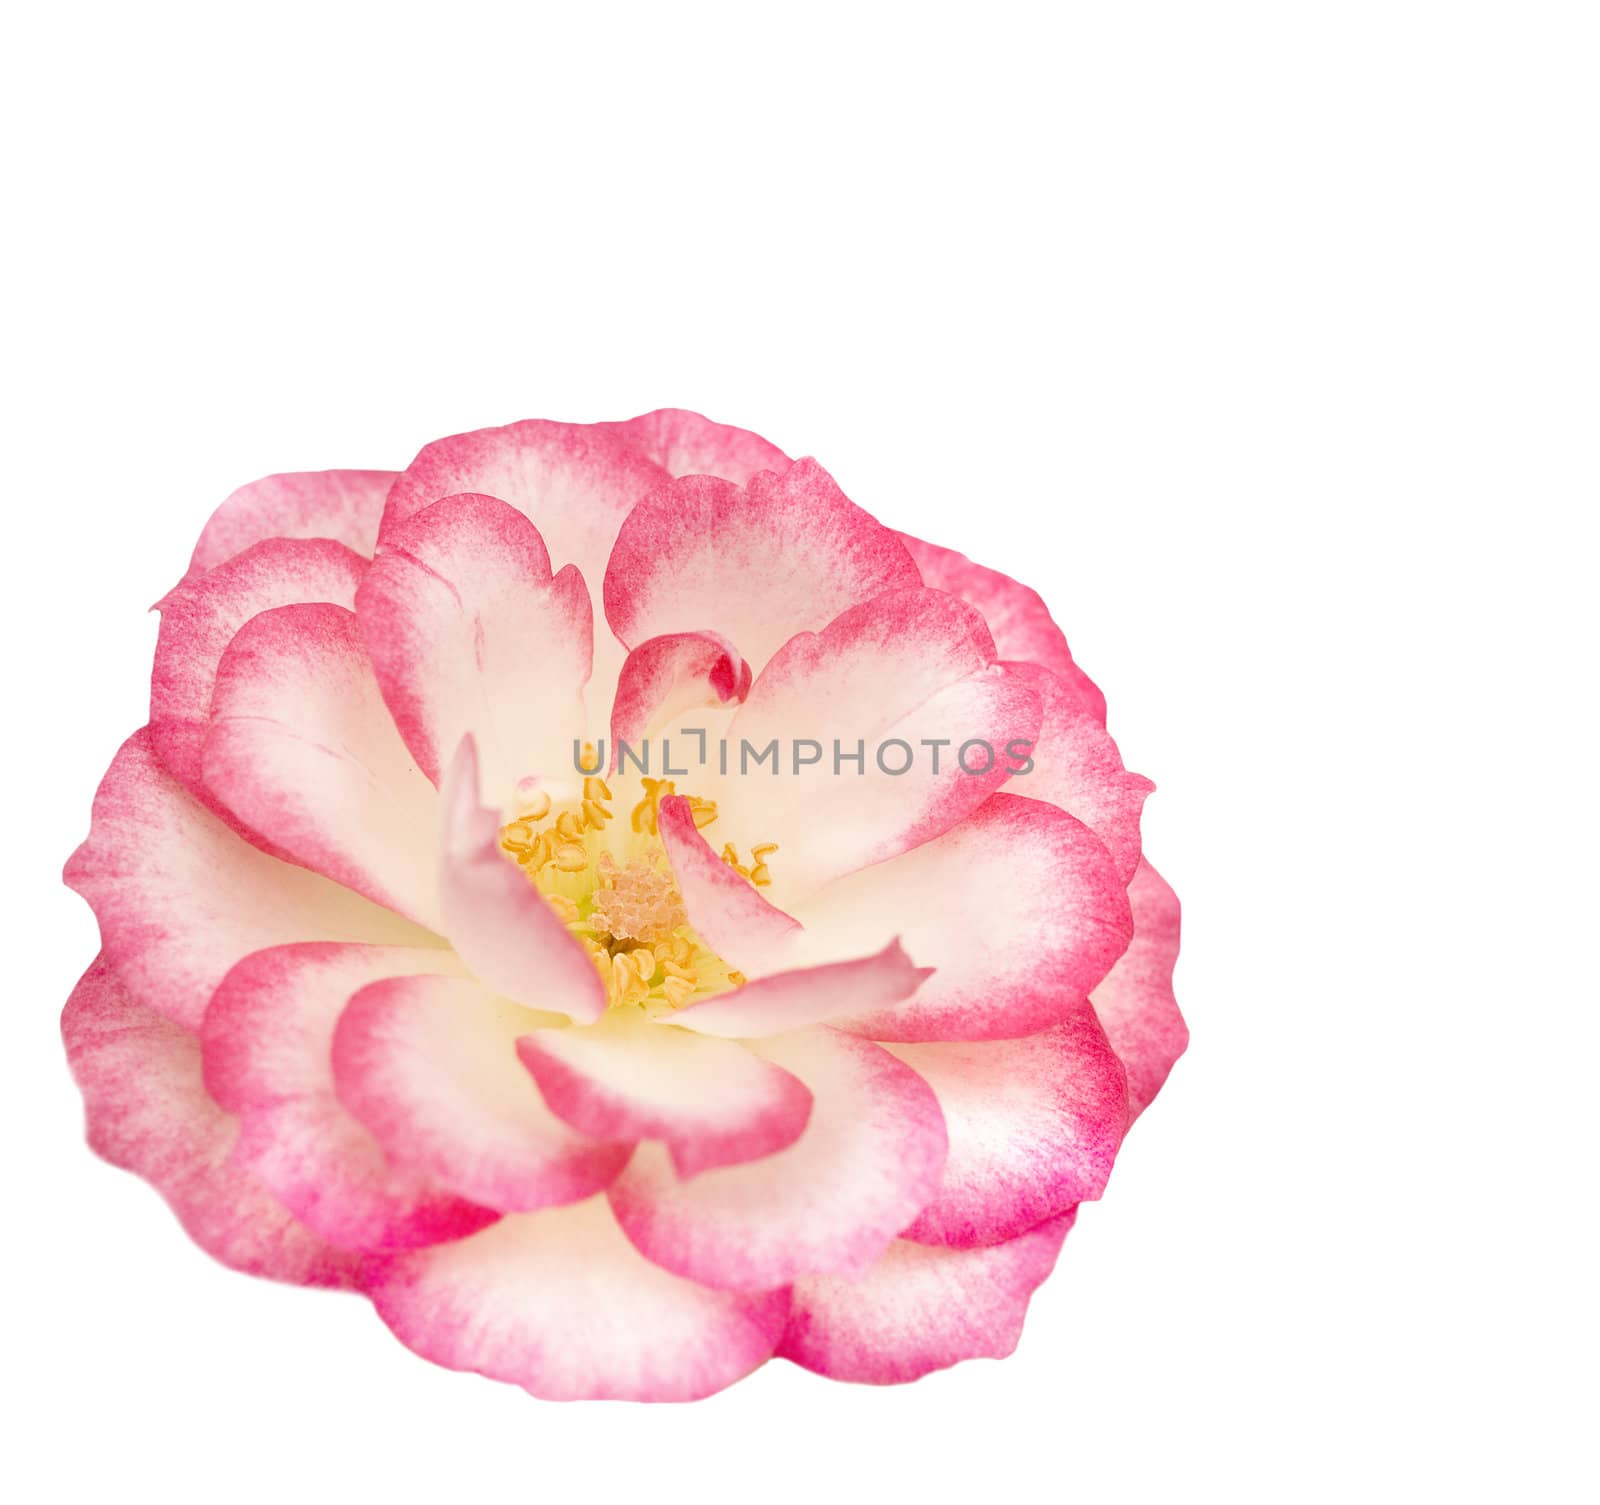 pink and white miniature rose flower isolated over white background